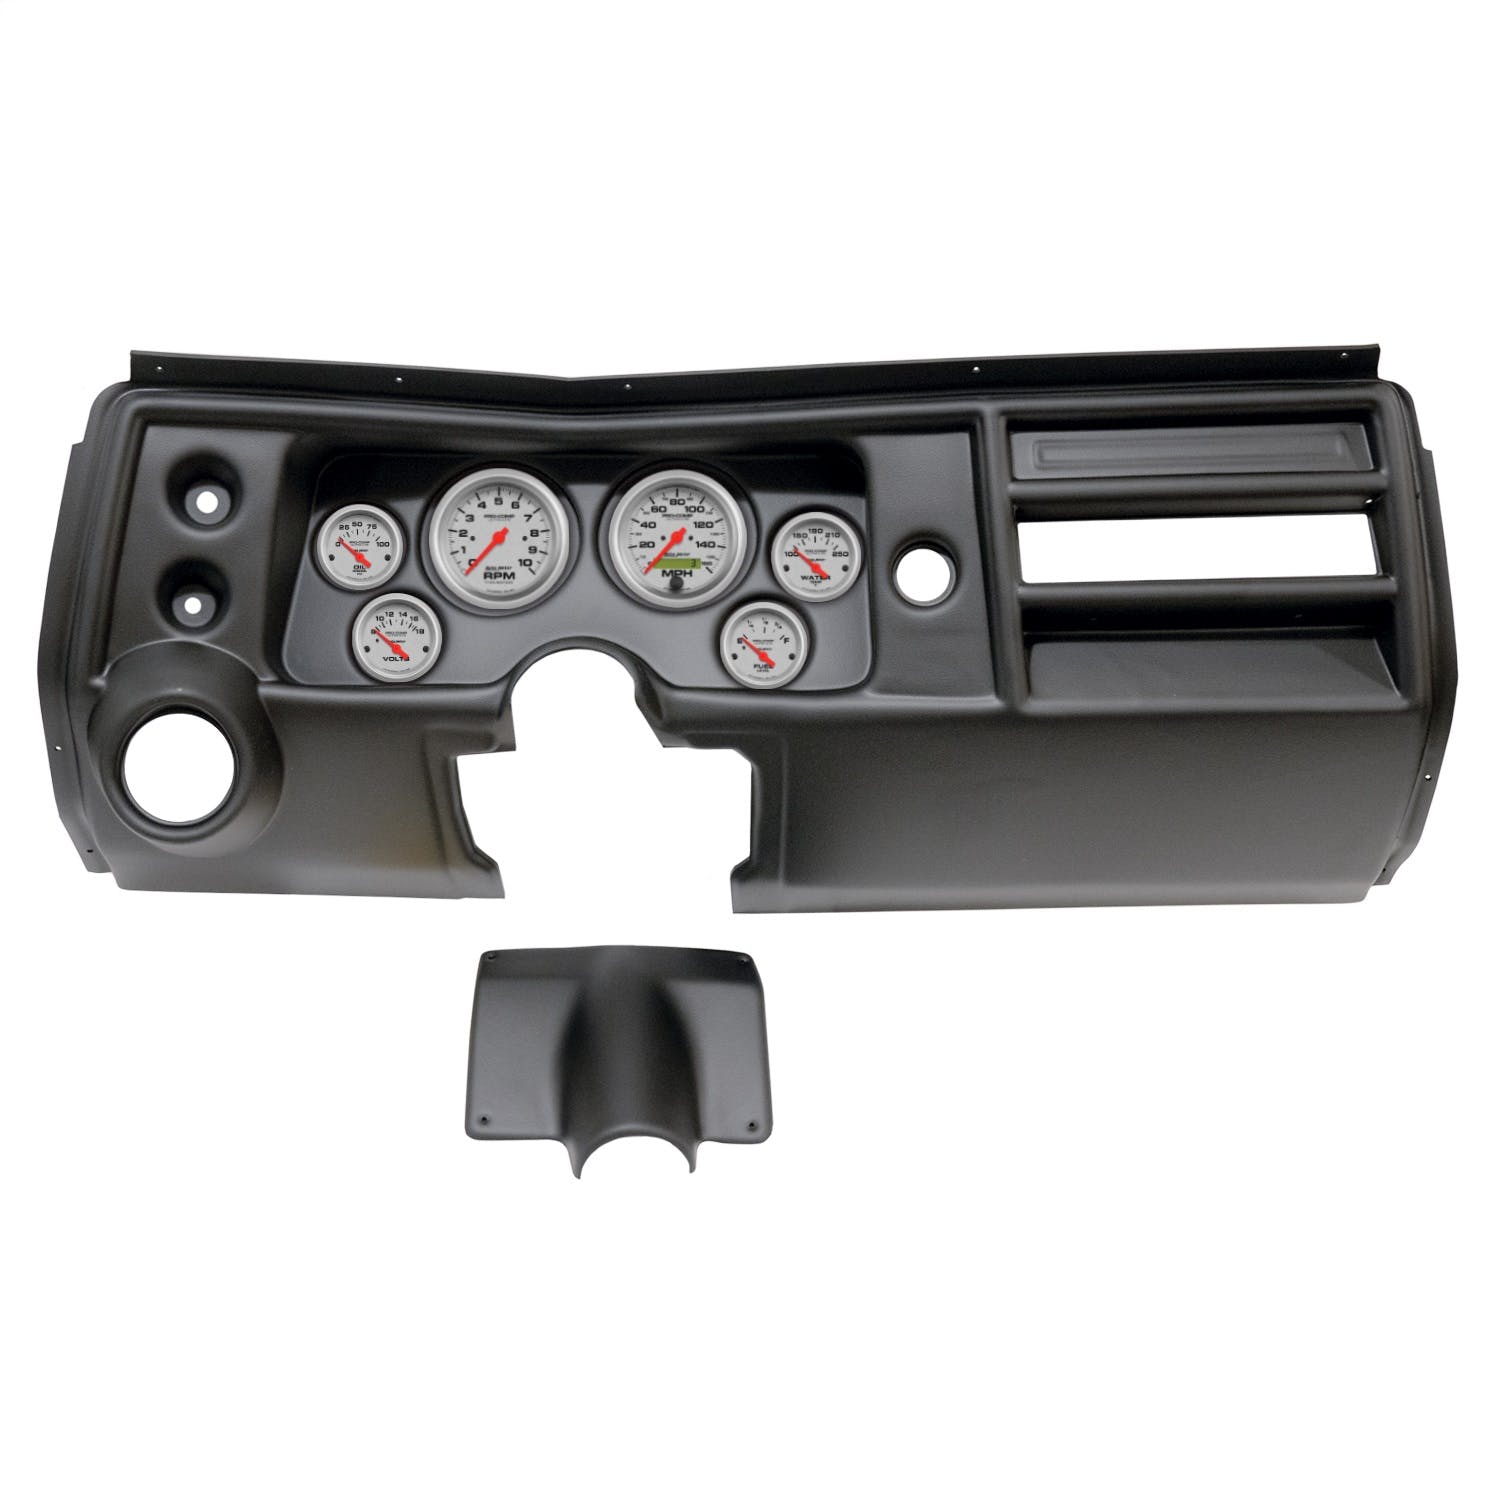 AutoMeter Products 2902-13 6 Gauge Direct-Fit Dash Kit, Chevy Chevelle Vent 68, Ultra-Lite